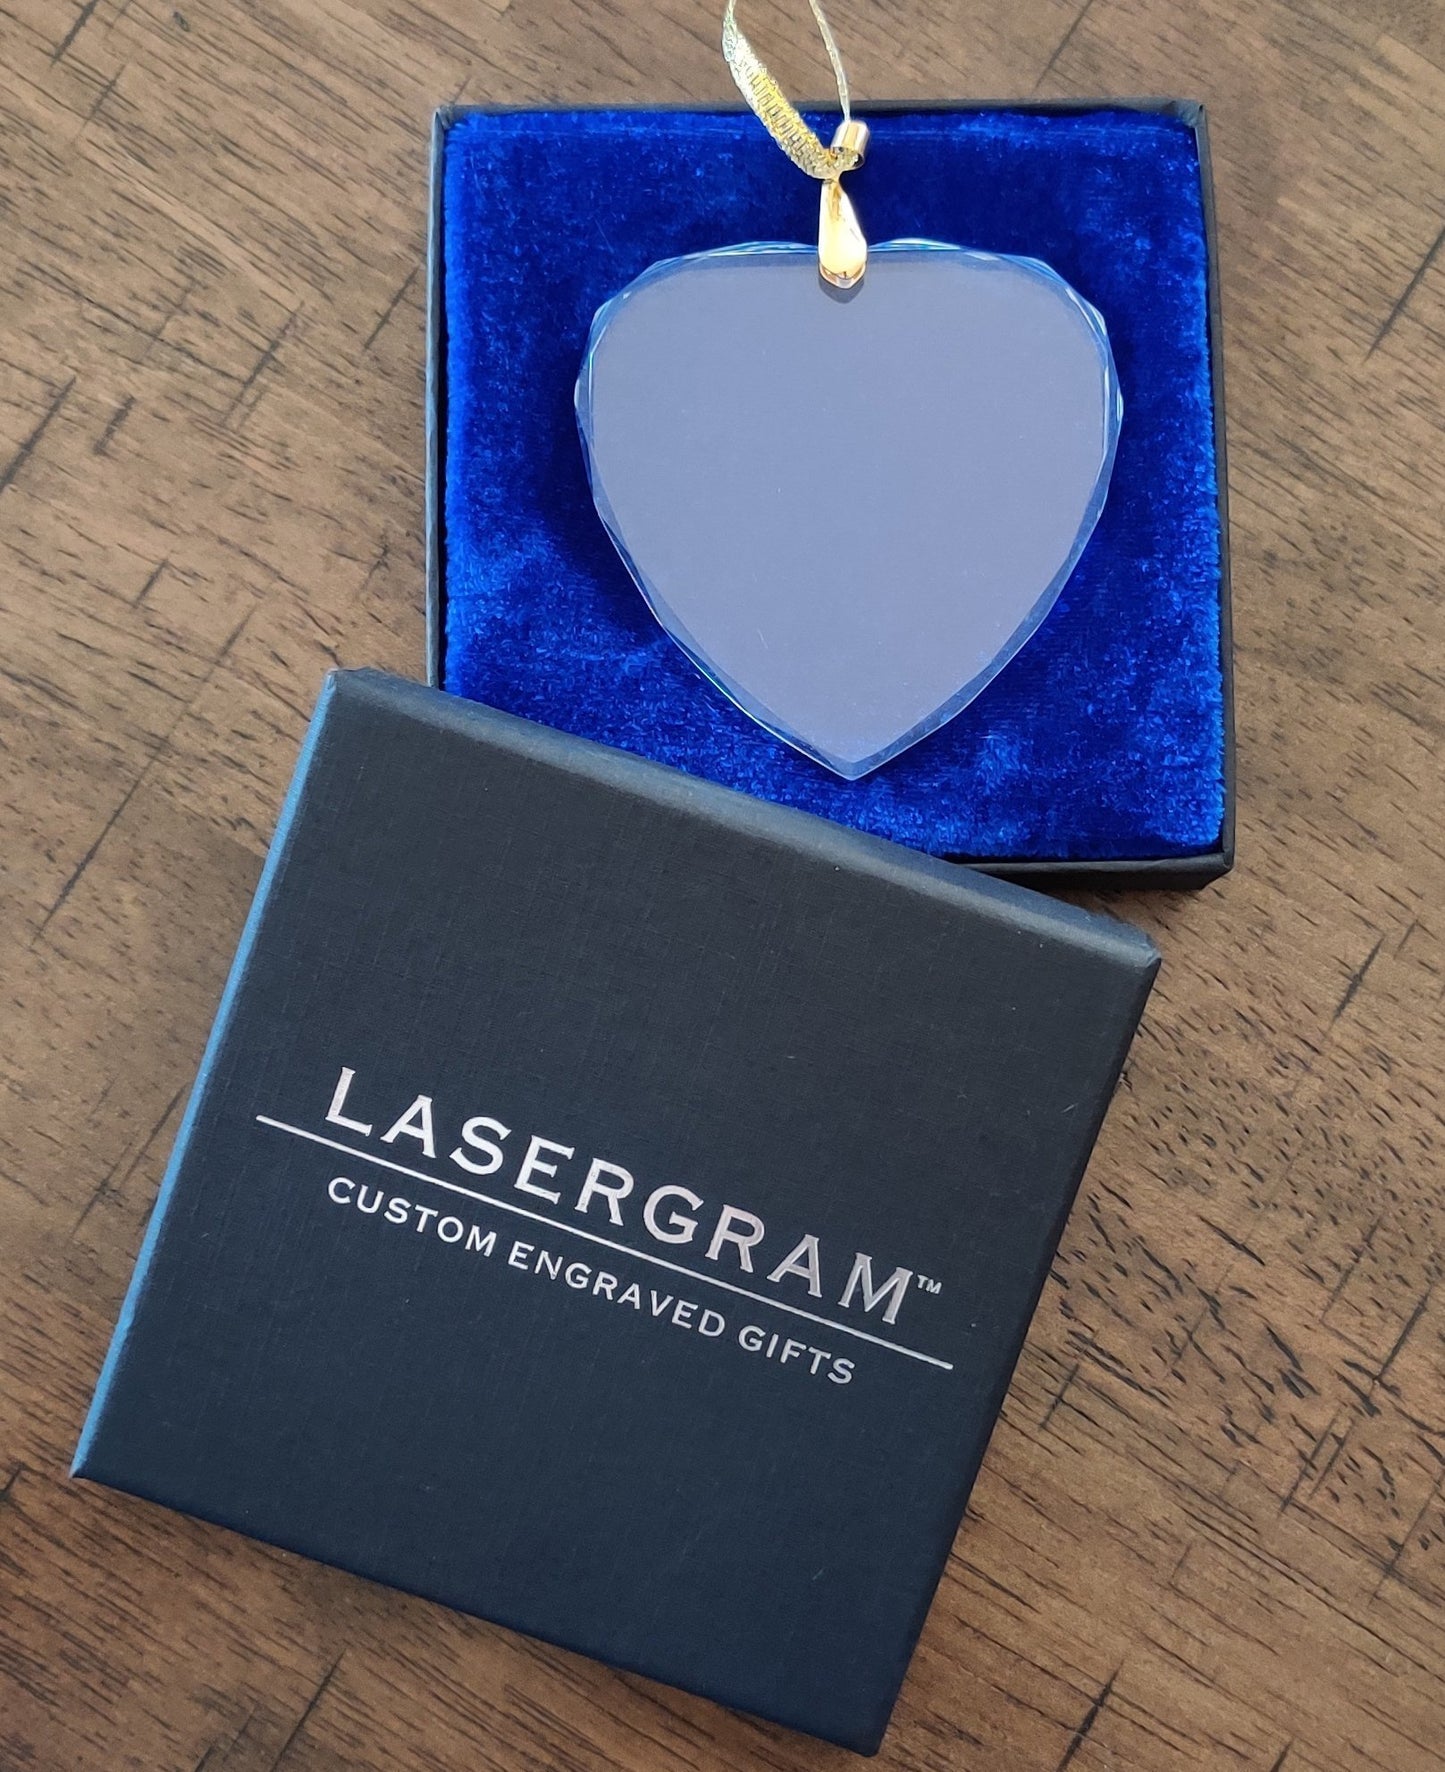 LaserGram Christmas Ornament, Band Director, Personalized Engraving Included (Heart Shape)